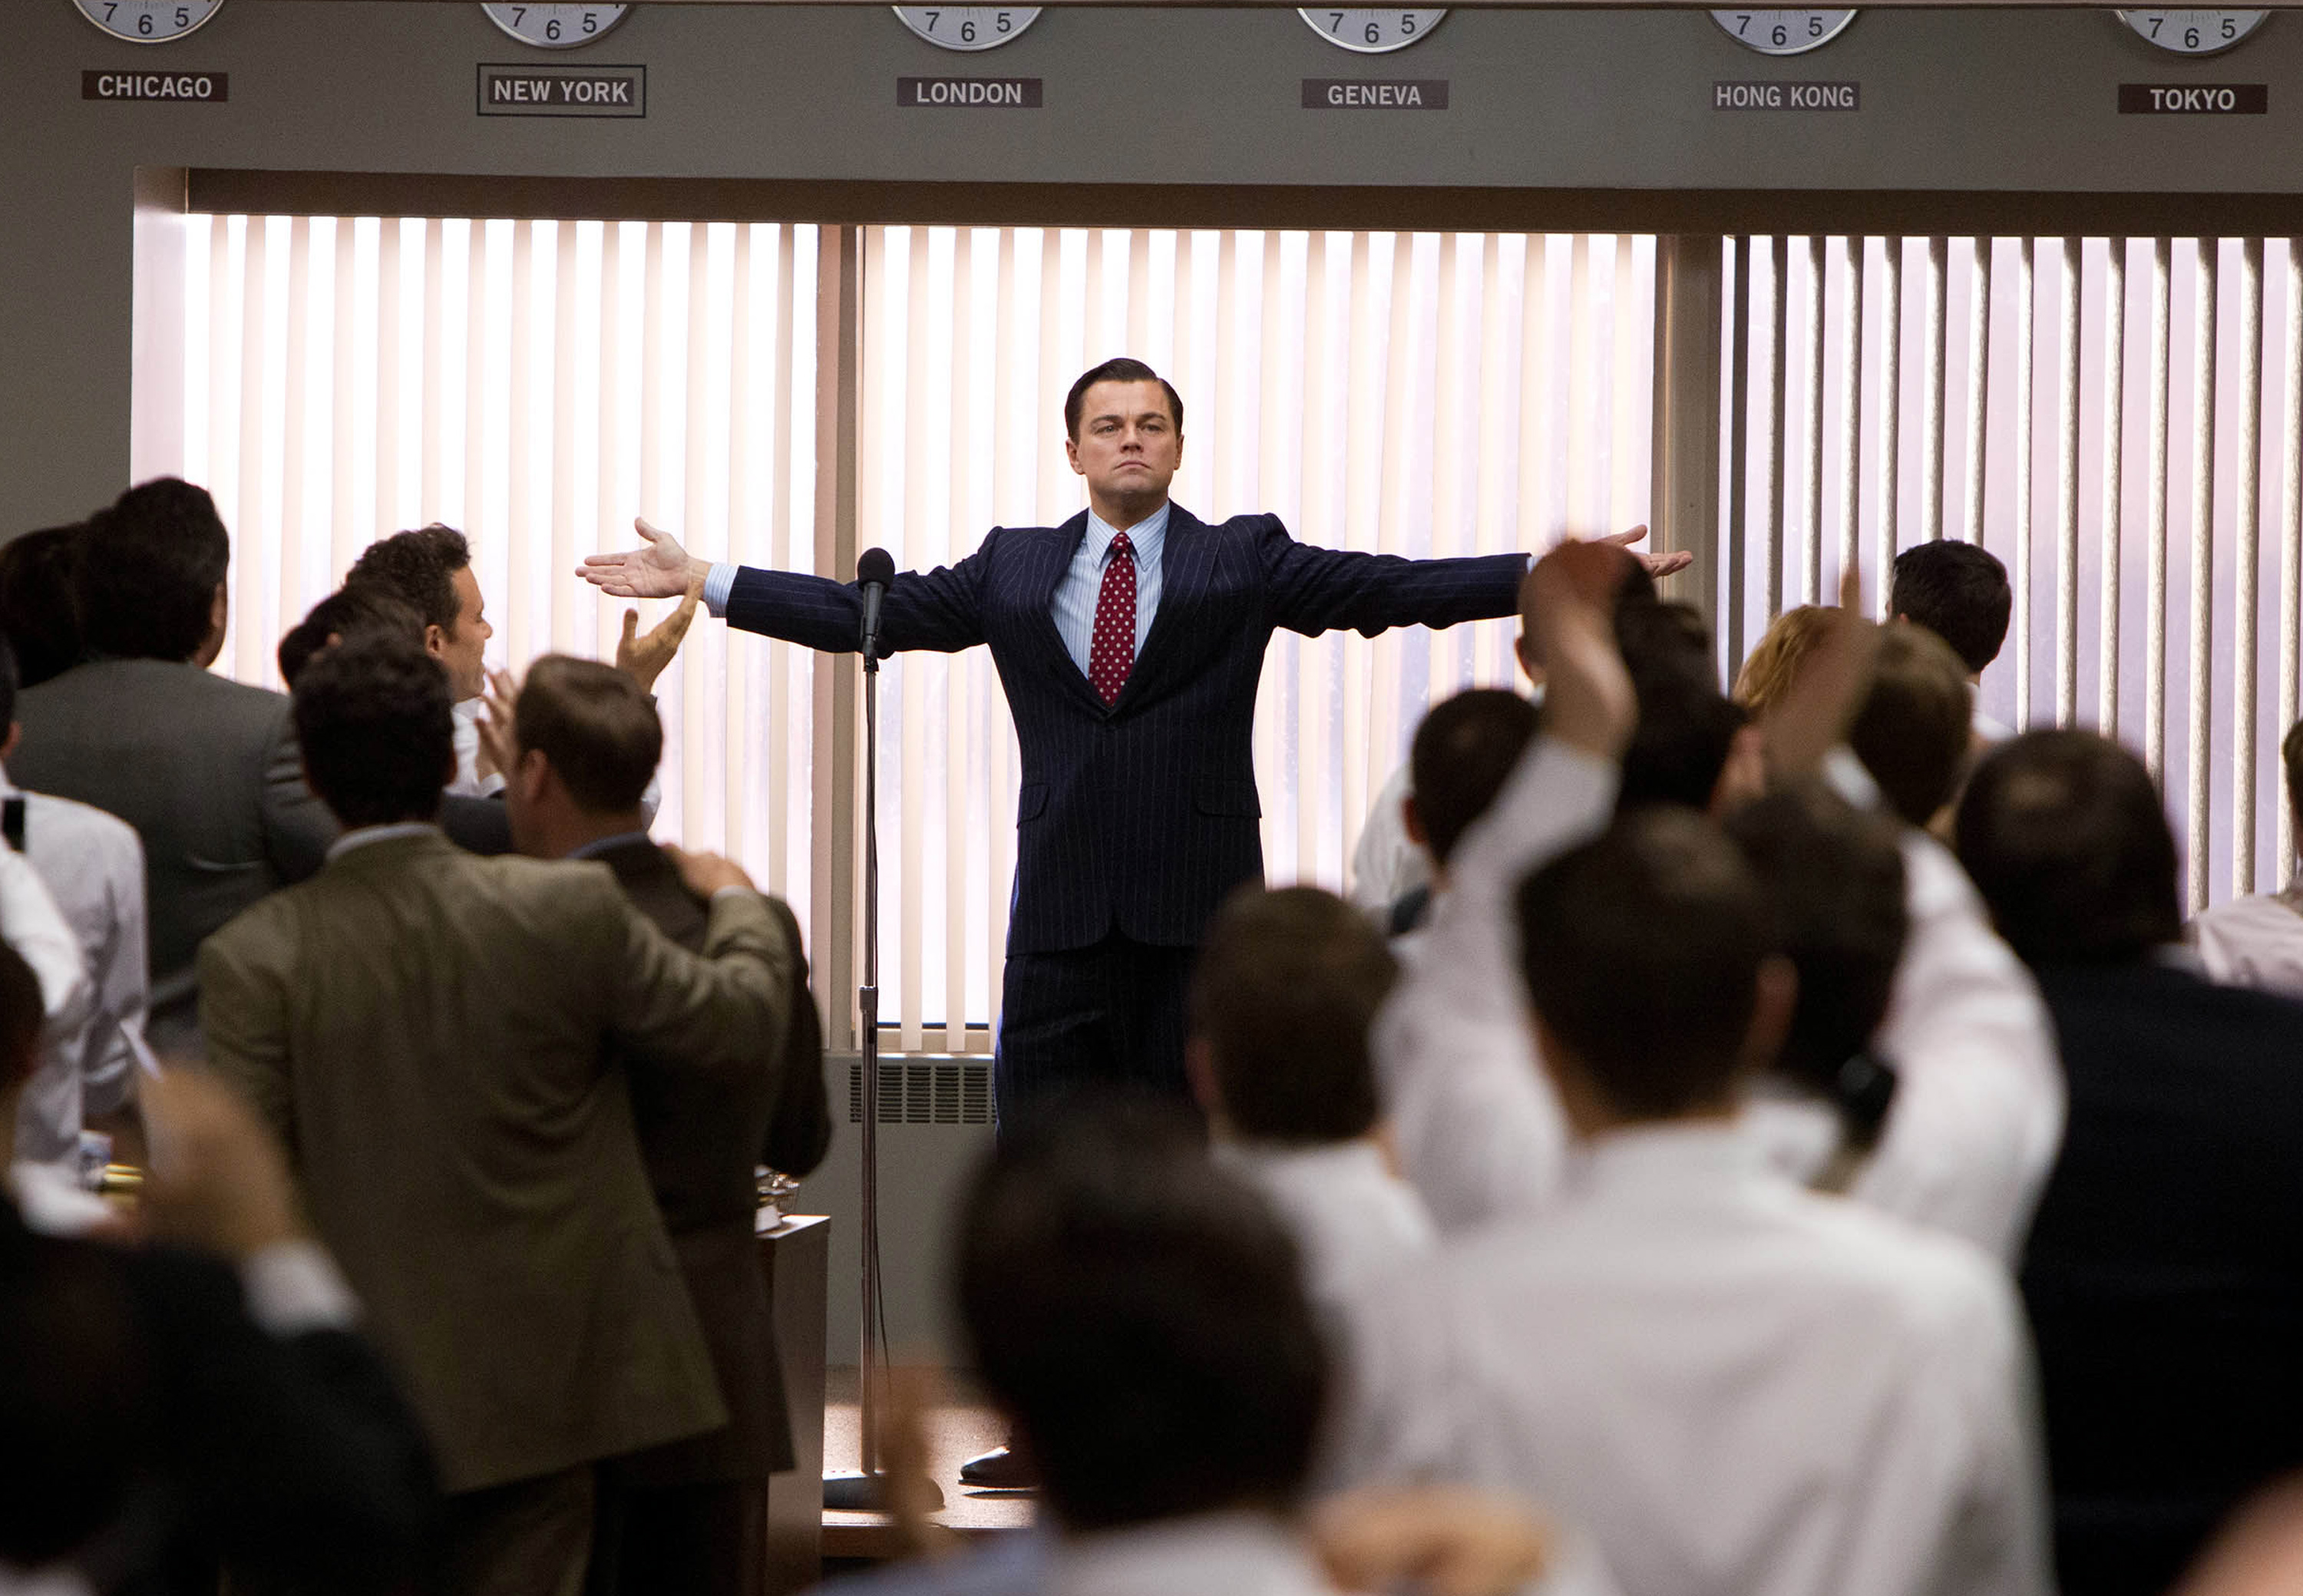 The Wolf of Wall Street with money in hand Wallpaper ID4665